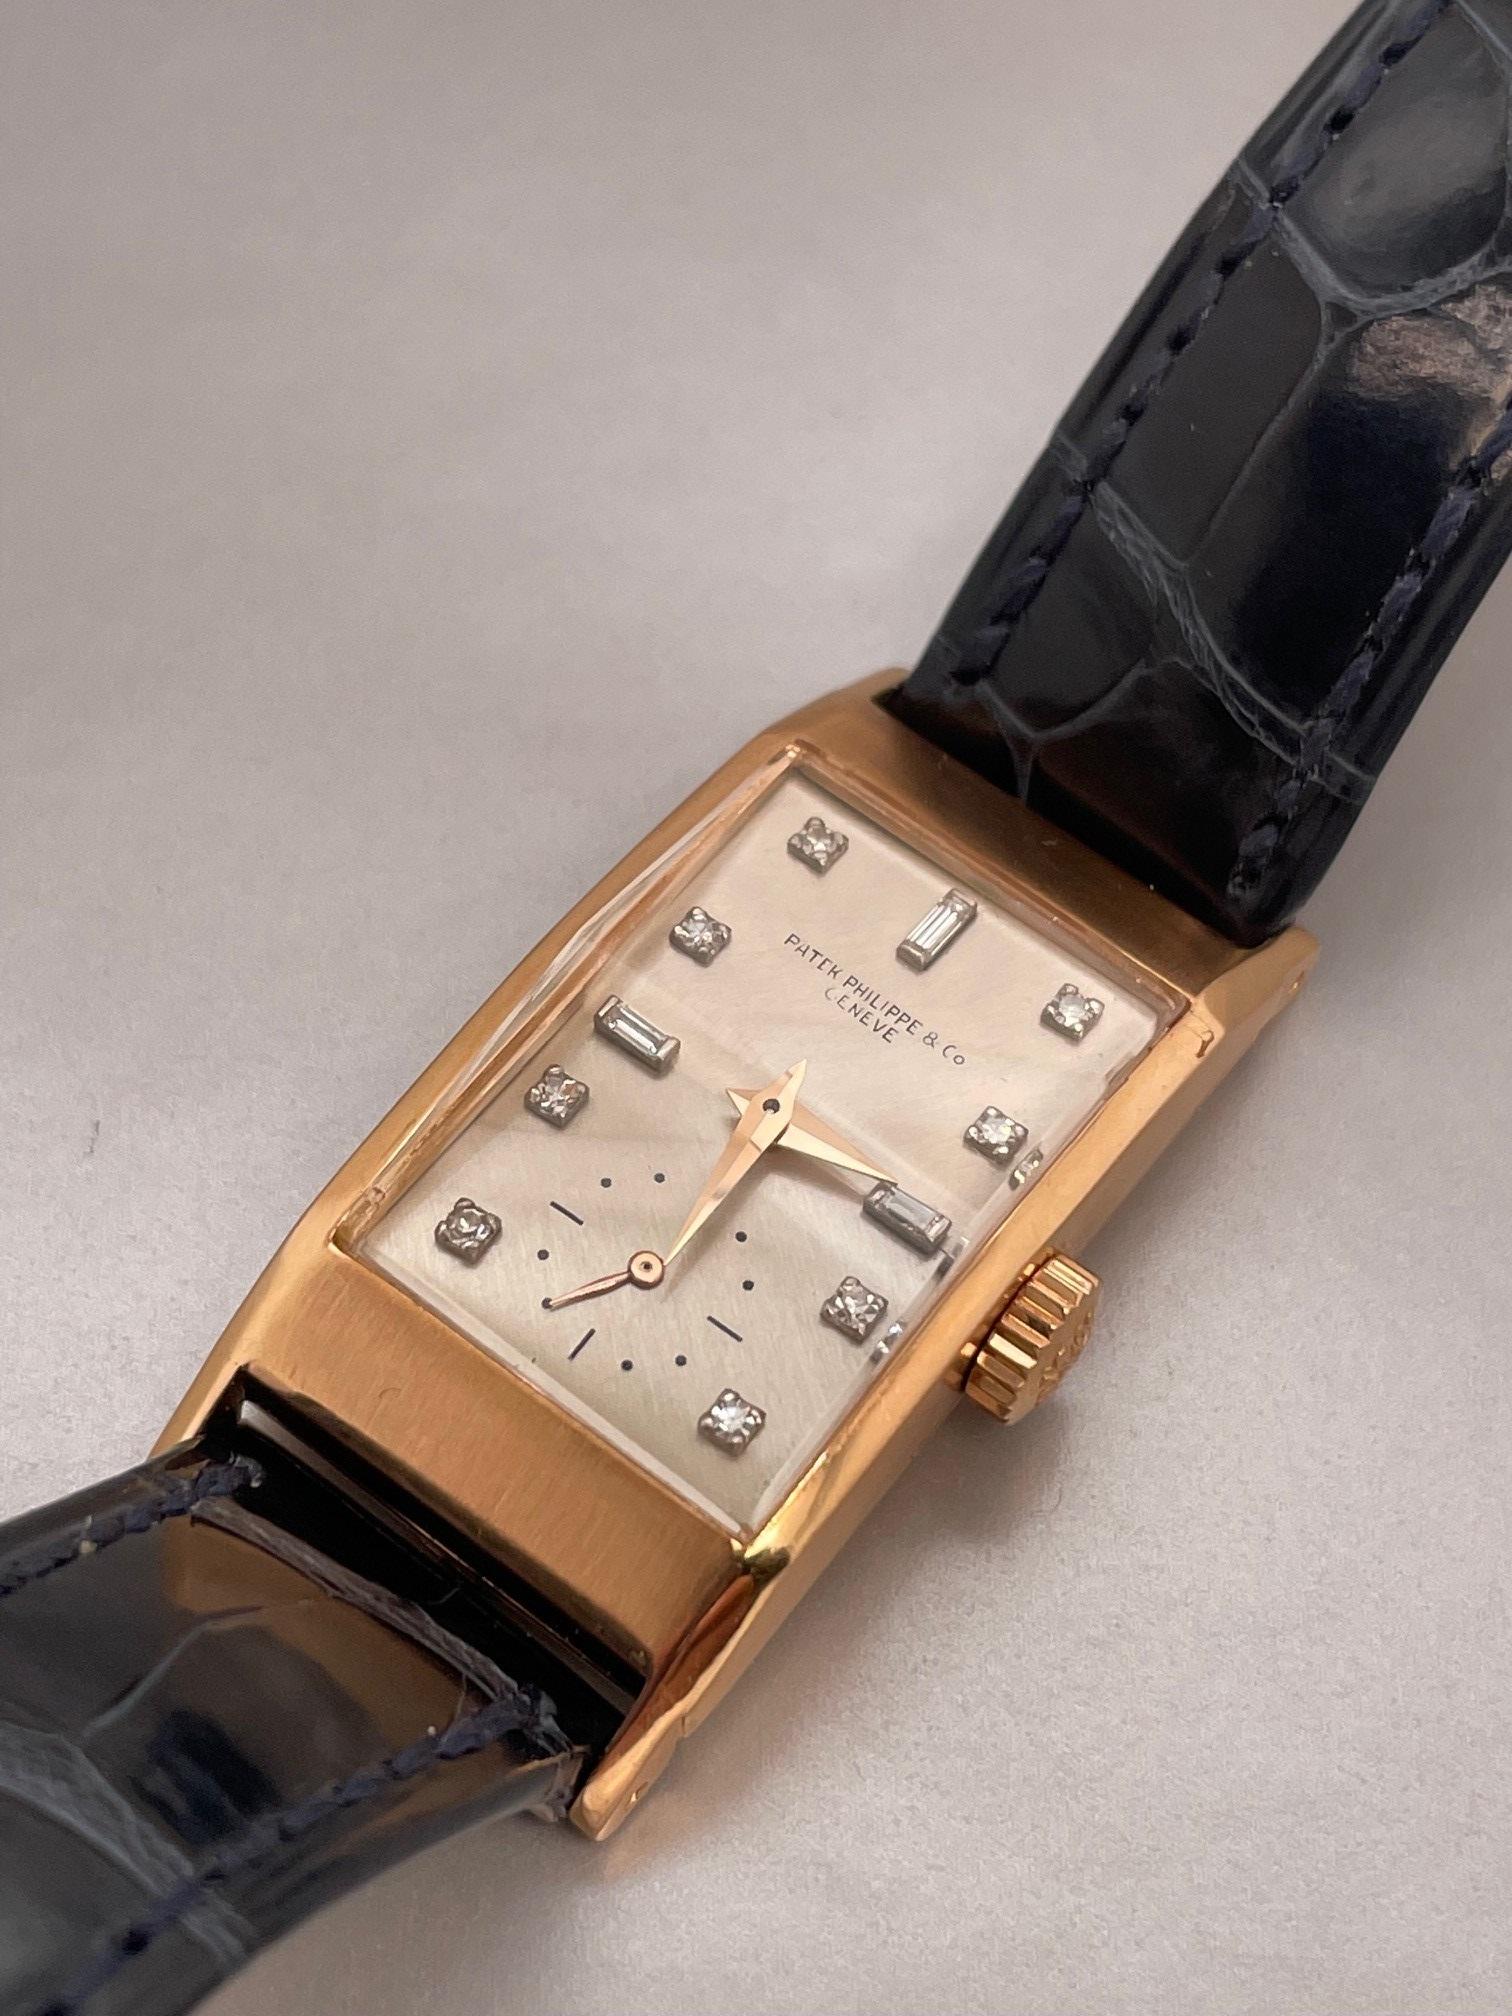 Vintage 18k Rose Gold Patek Philippe rectangular watch featuring a silver dial with diamond markers, raised enamel print, original faceted crystal, Patek crown, Watch reference number #2461,  9-90 movement, s#843xxxx, case serial number #625xxx.